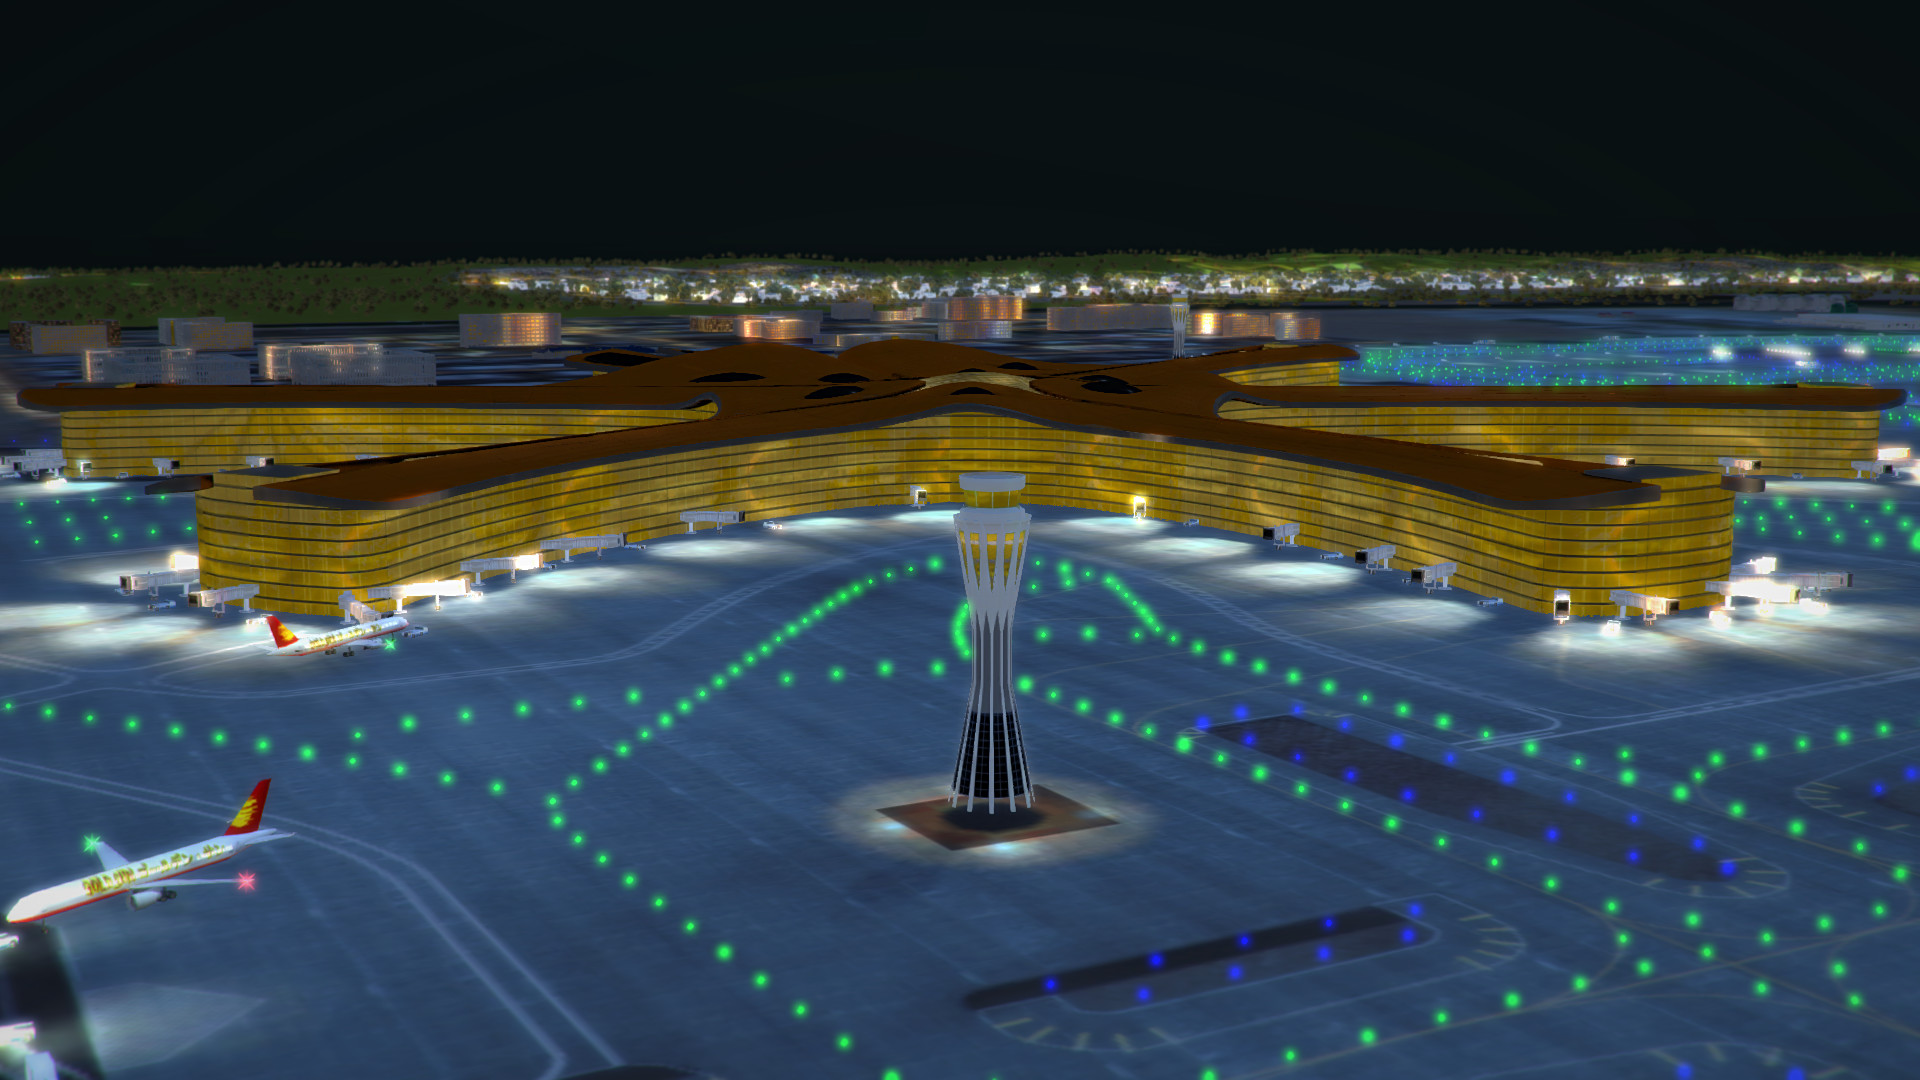 Tower!3D Pro - ZBAD airport screenshot